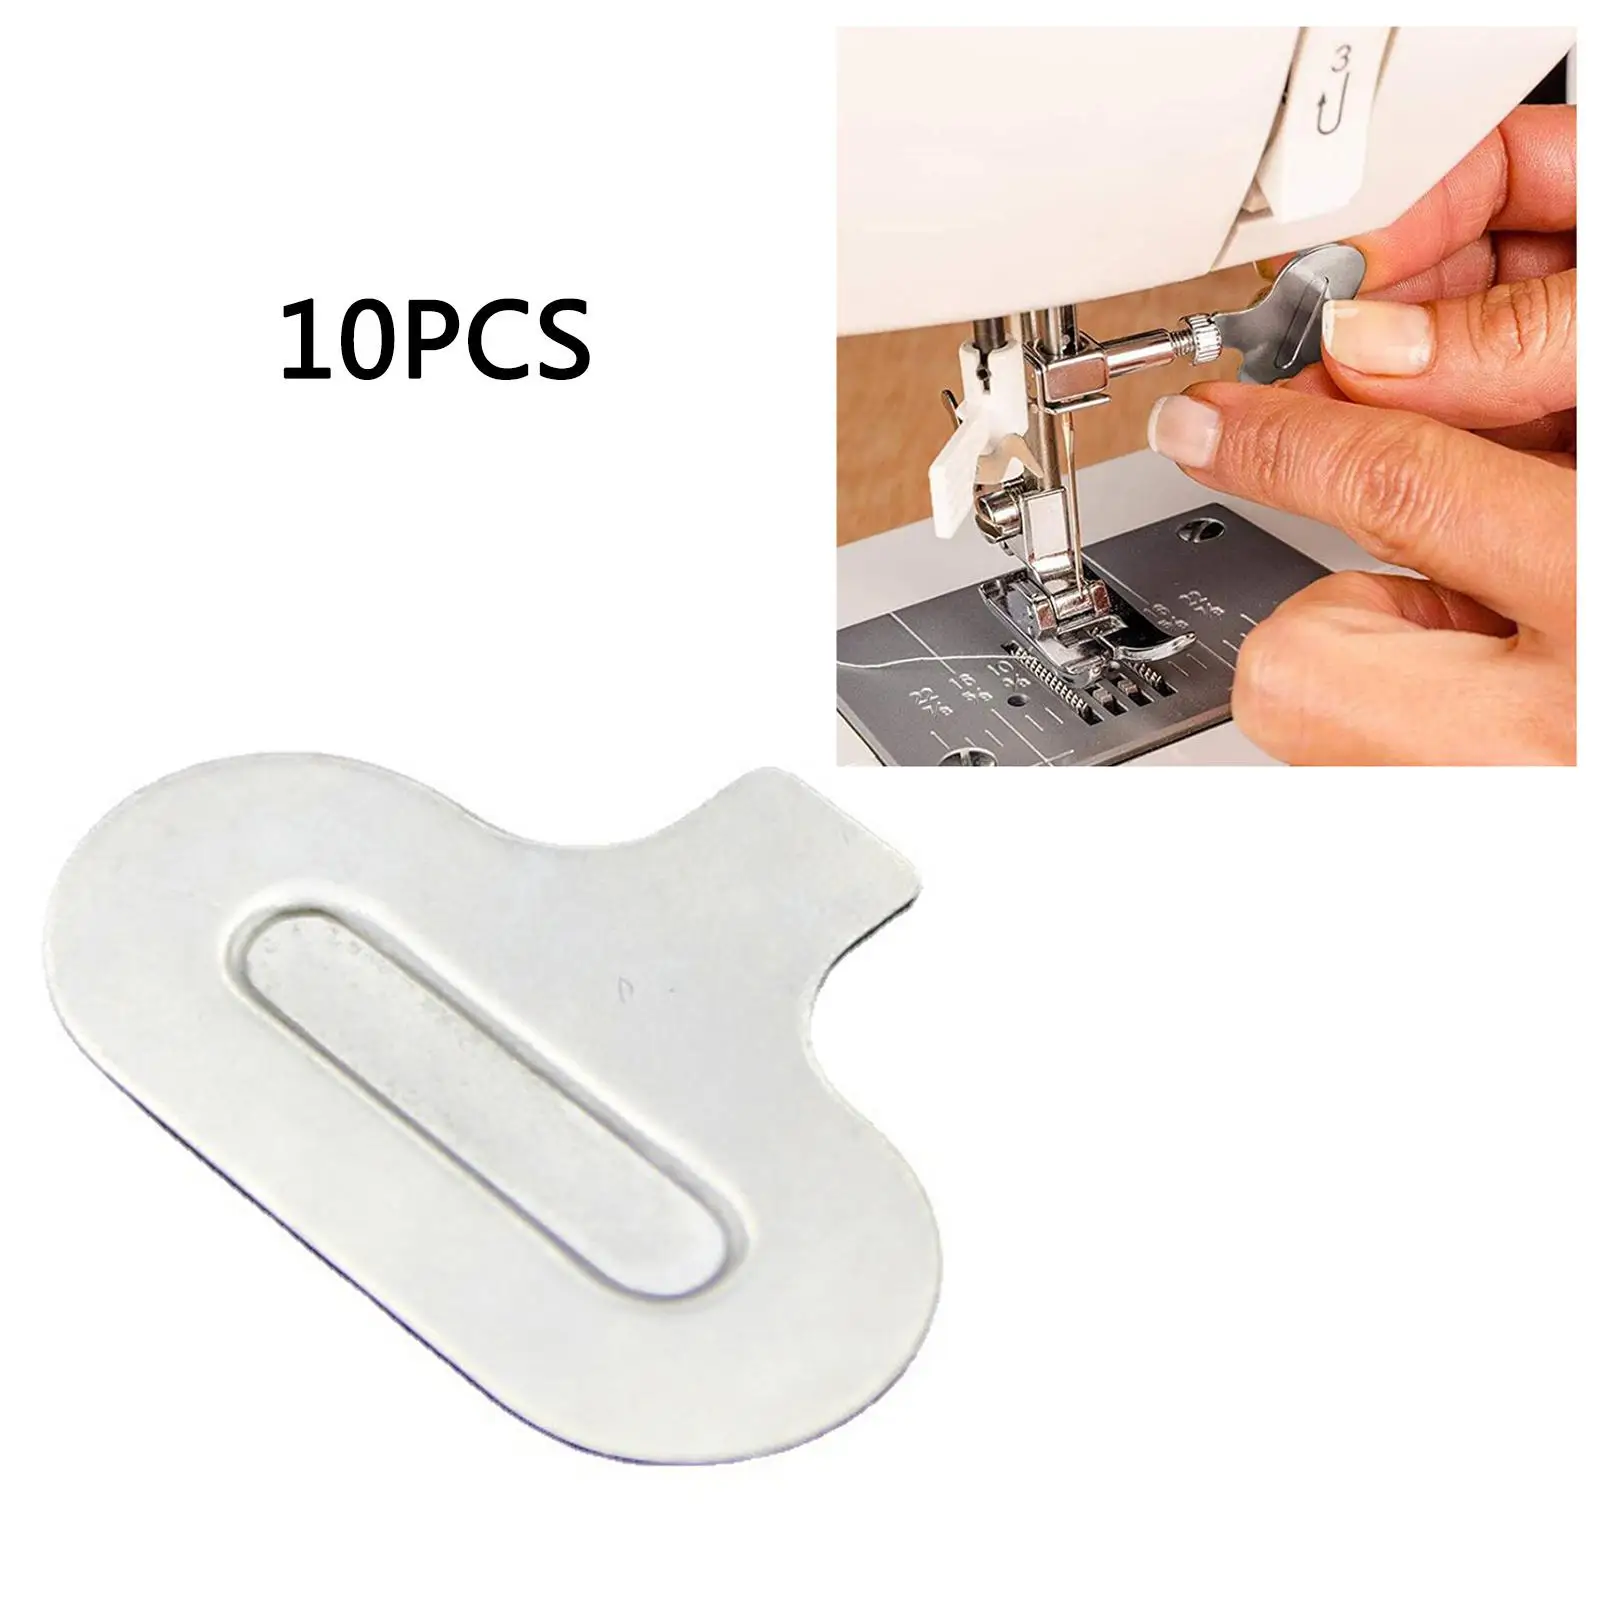 10Pcs Durable Plate Screwdriver Metal Portable Sewing Machine Repairing Tool for Home Household Industrial